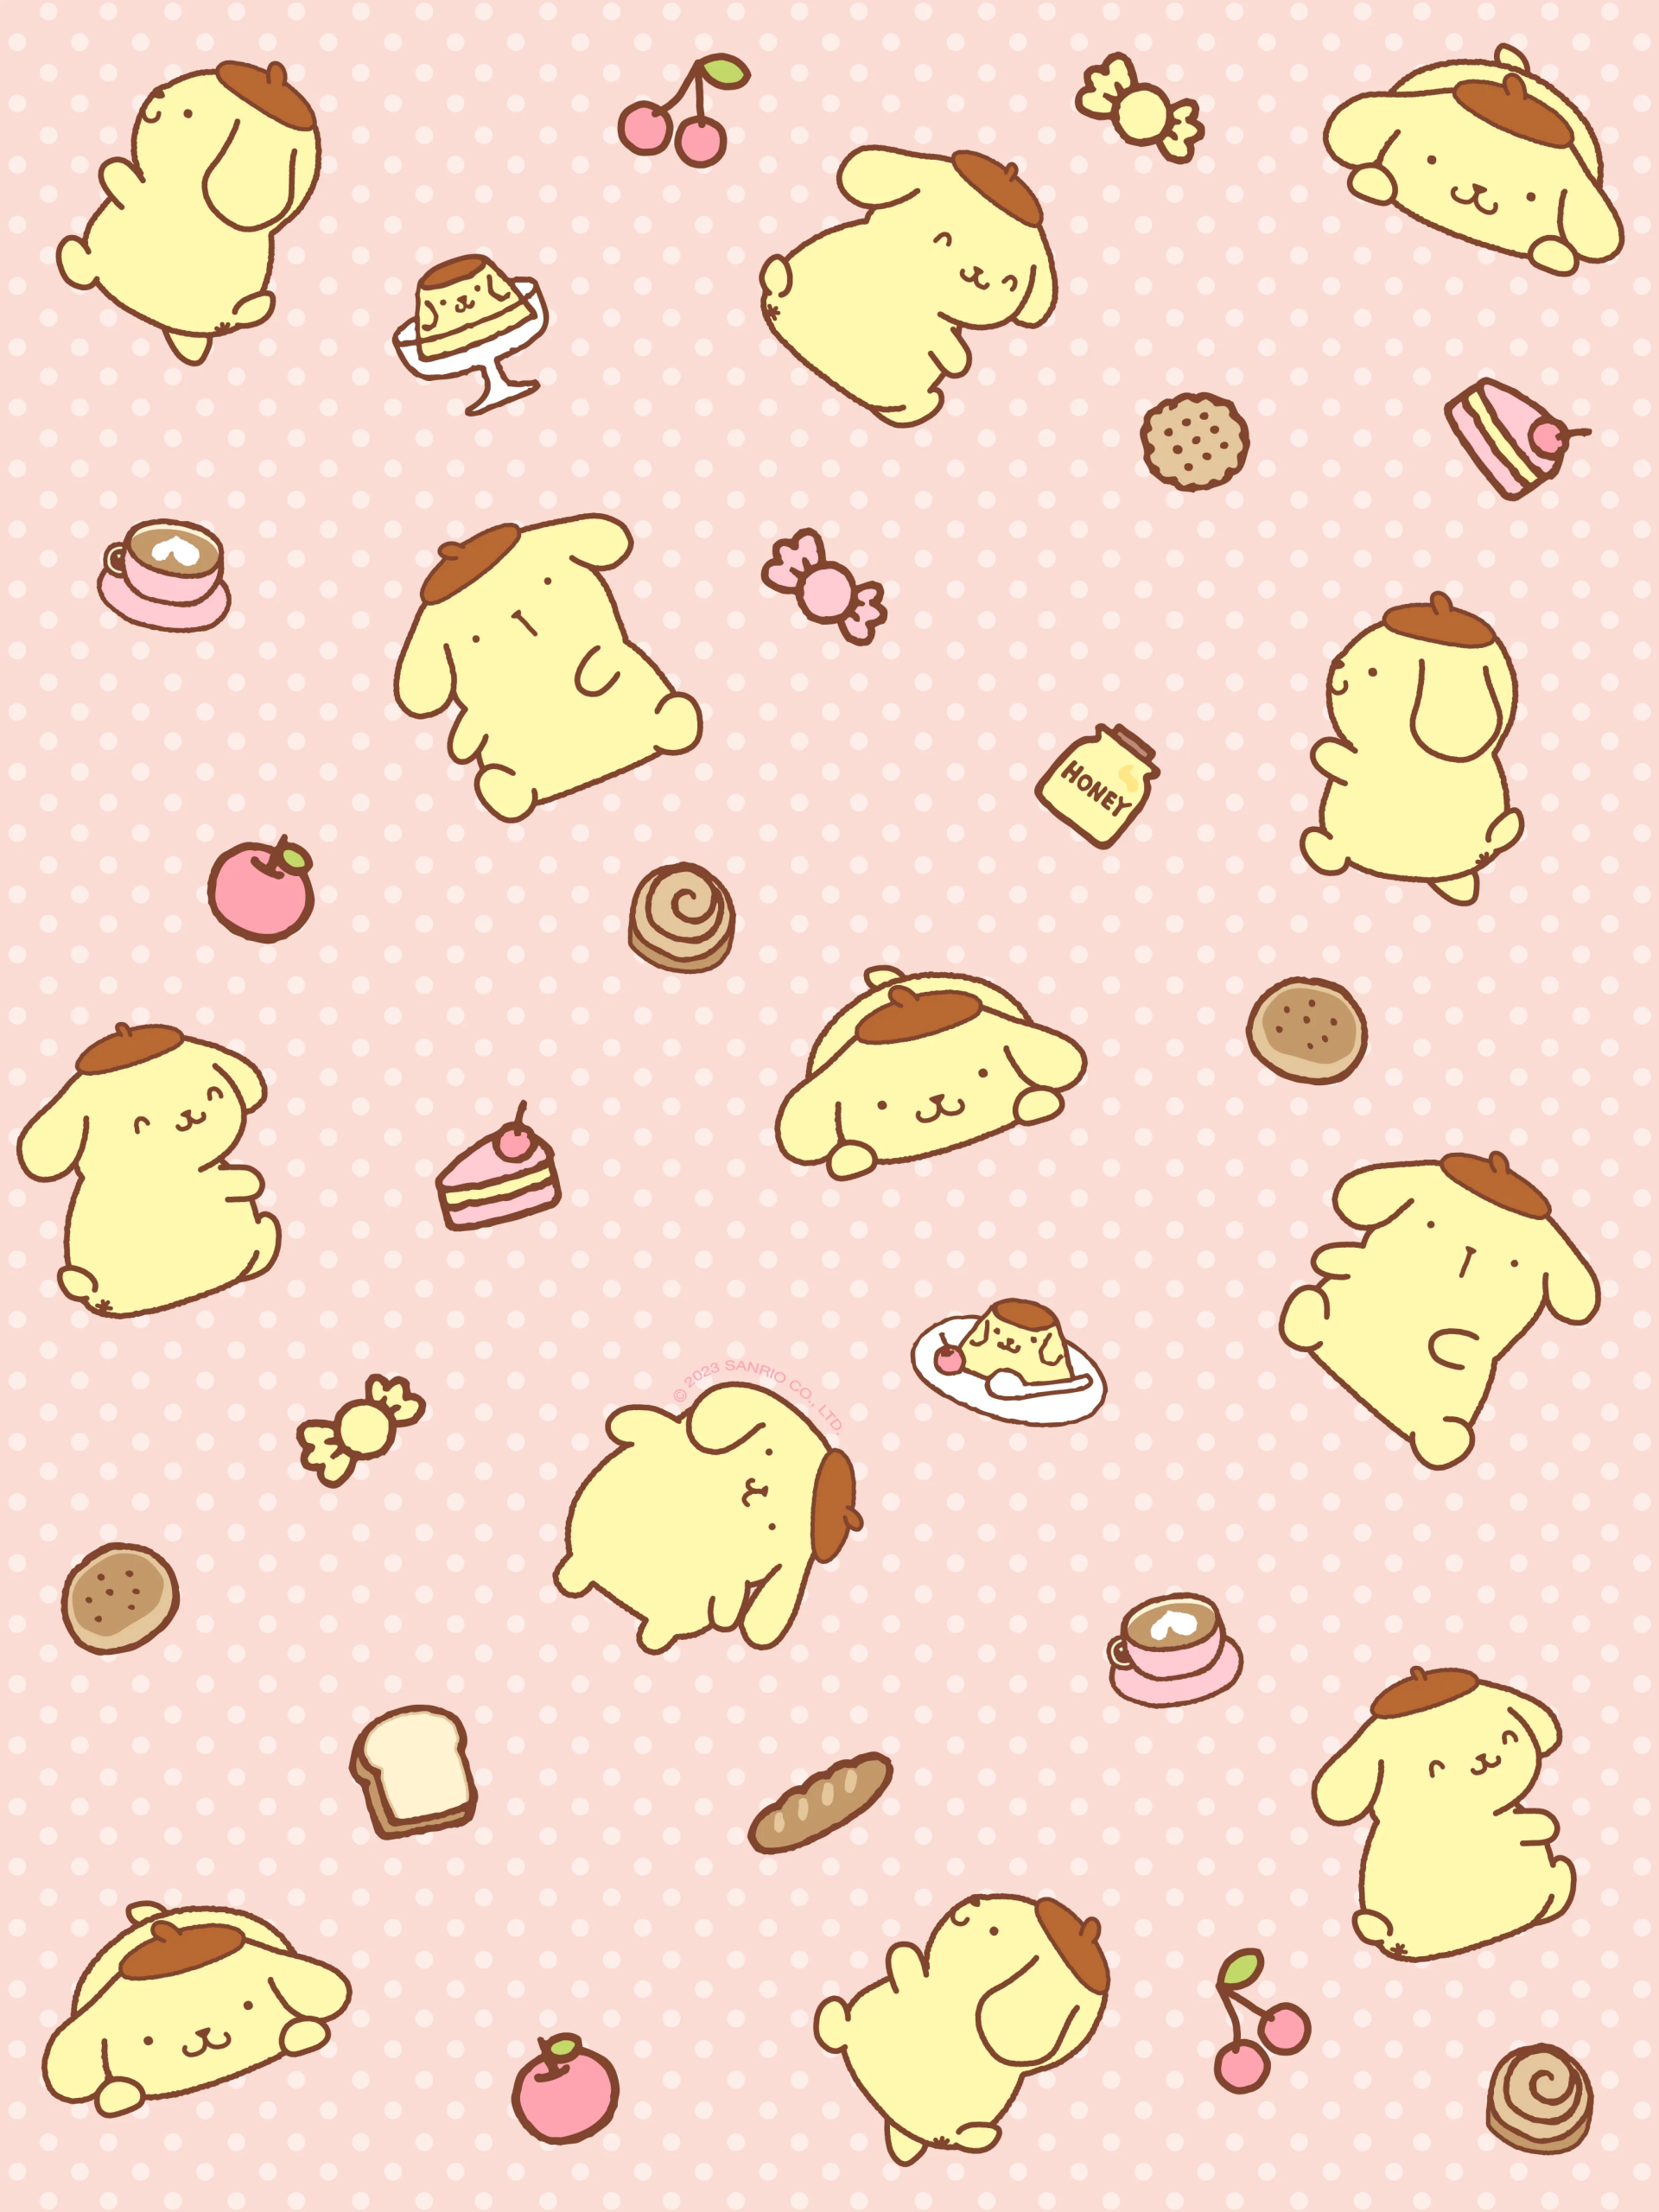 Cute Pompompurin pattern with various poses and sweets on a polka dot pink background, inspired by anime and Sanrio characters.